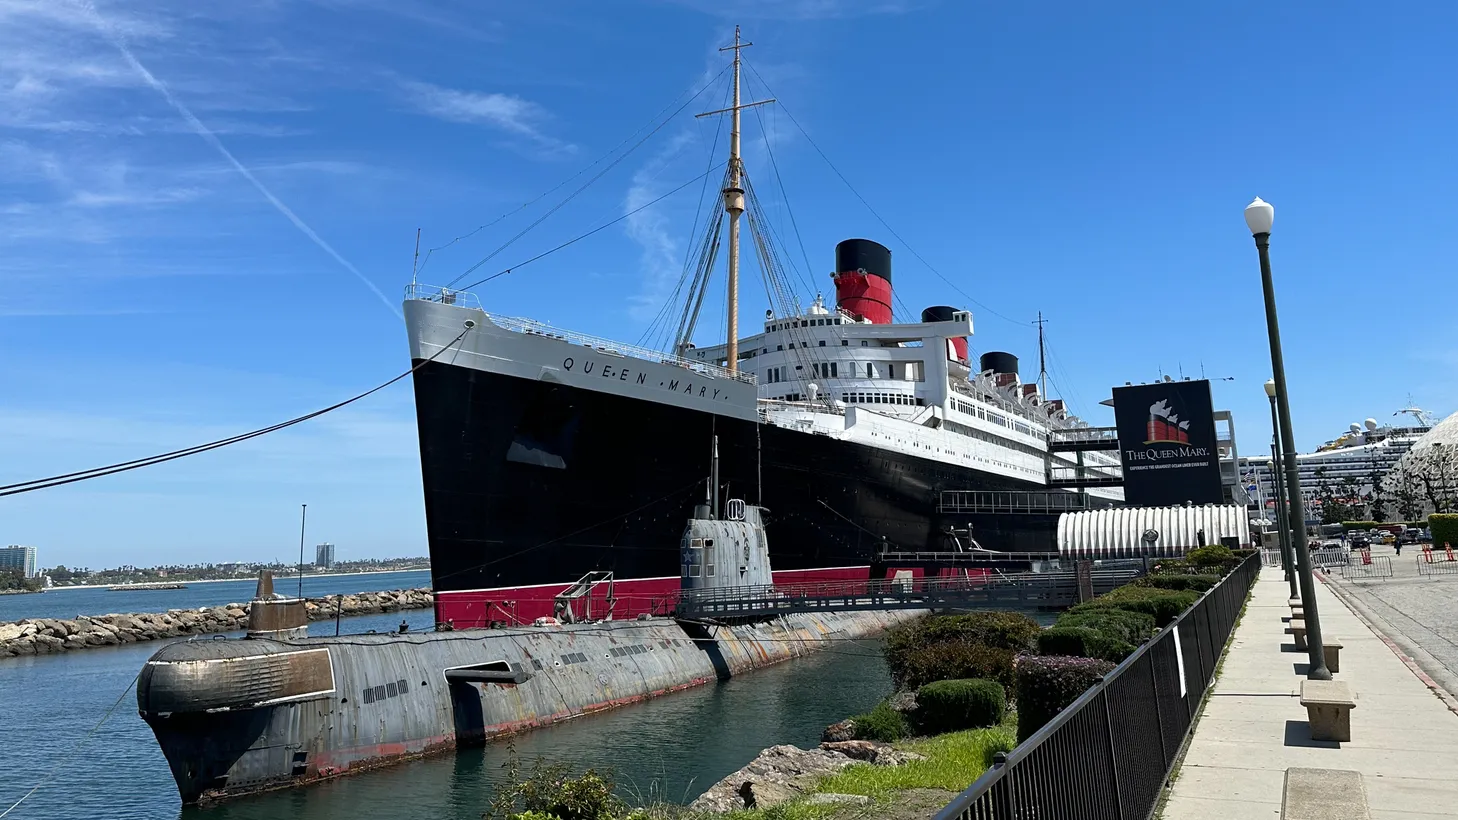 “[The Queen Mary] was Churchill's floating Whitehall during World War II. So many decisions regarding the D-Day invasion were decided right here in his cabin,” notes the ship’s longtime Commodore, Everette Hoard.